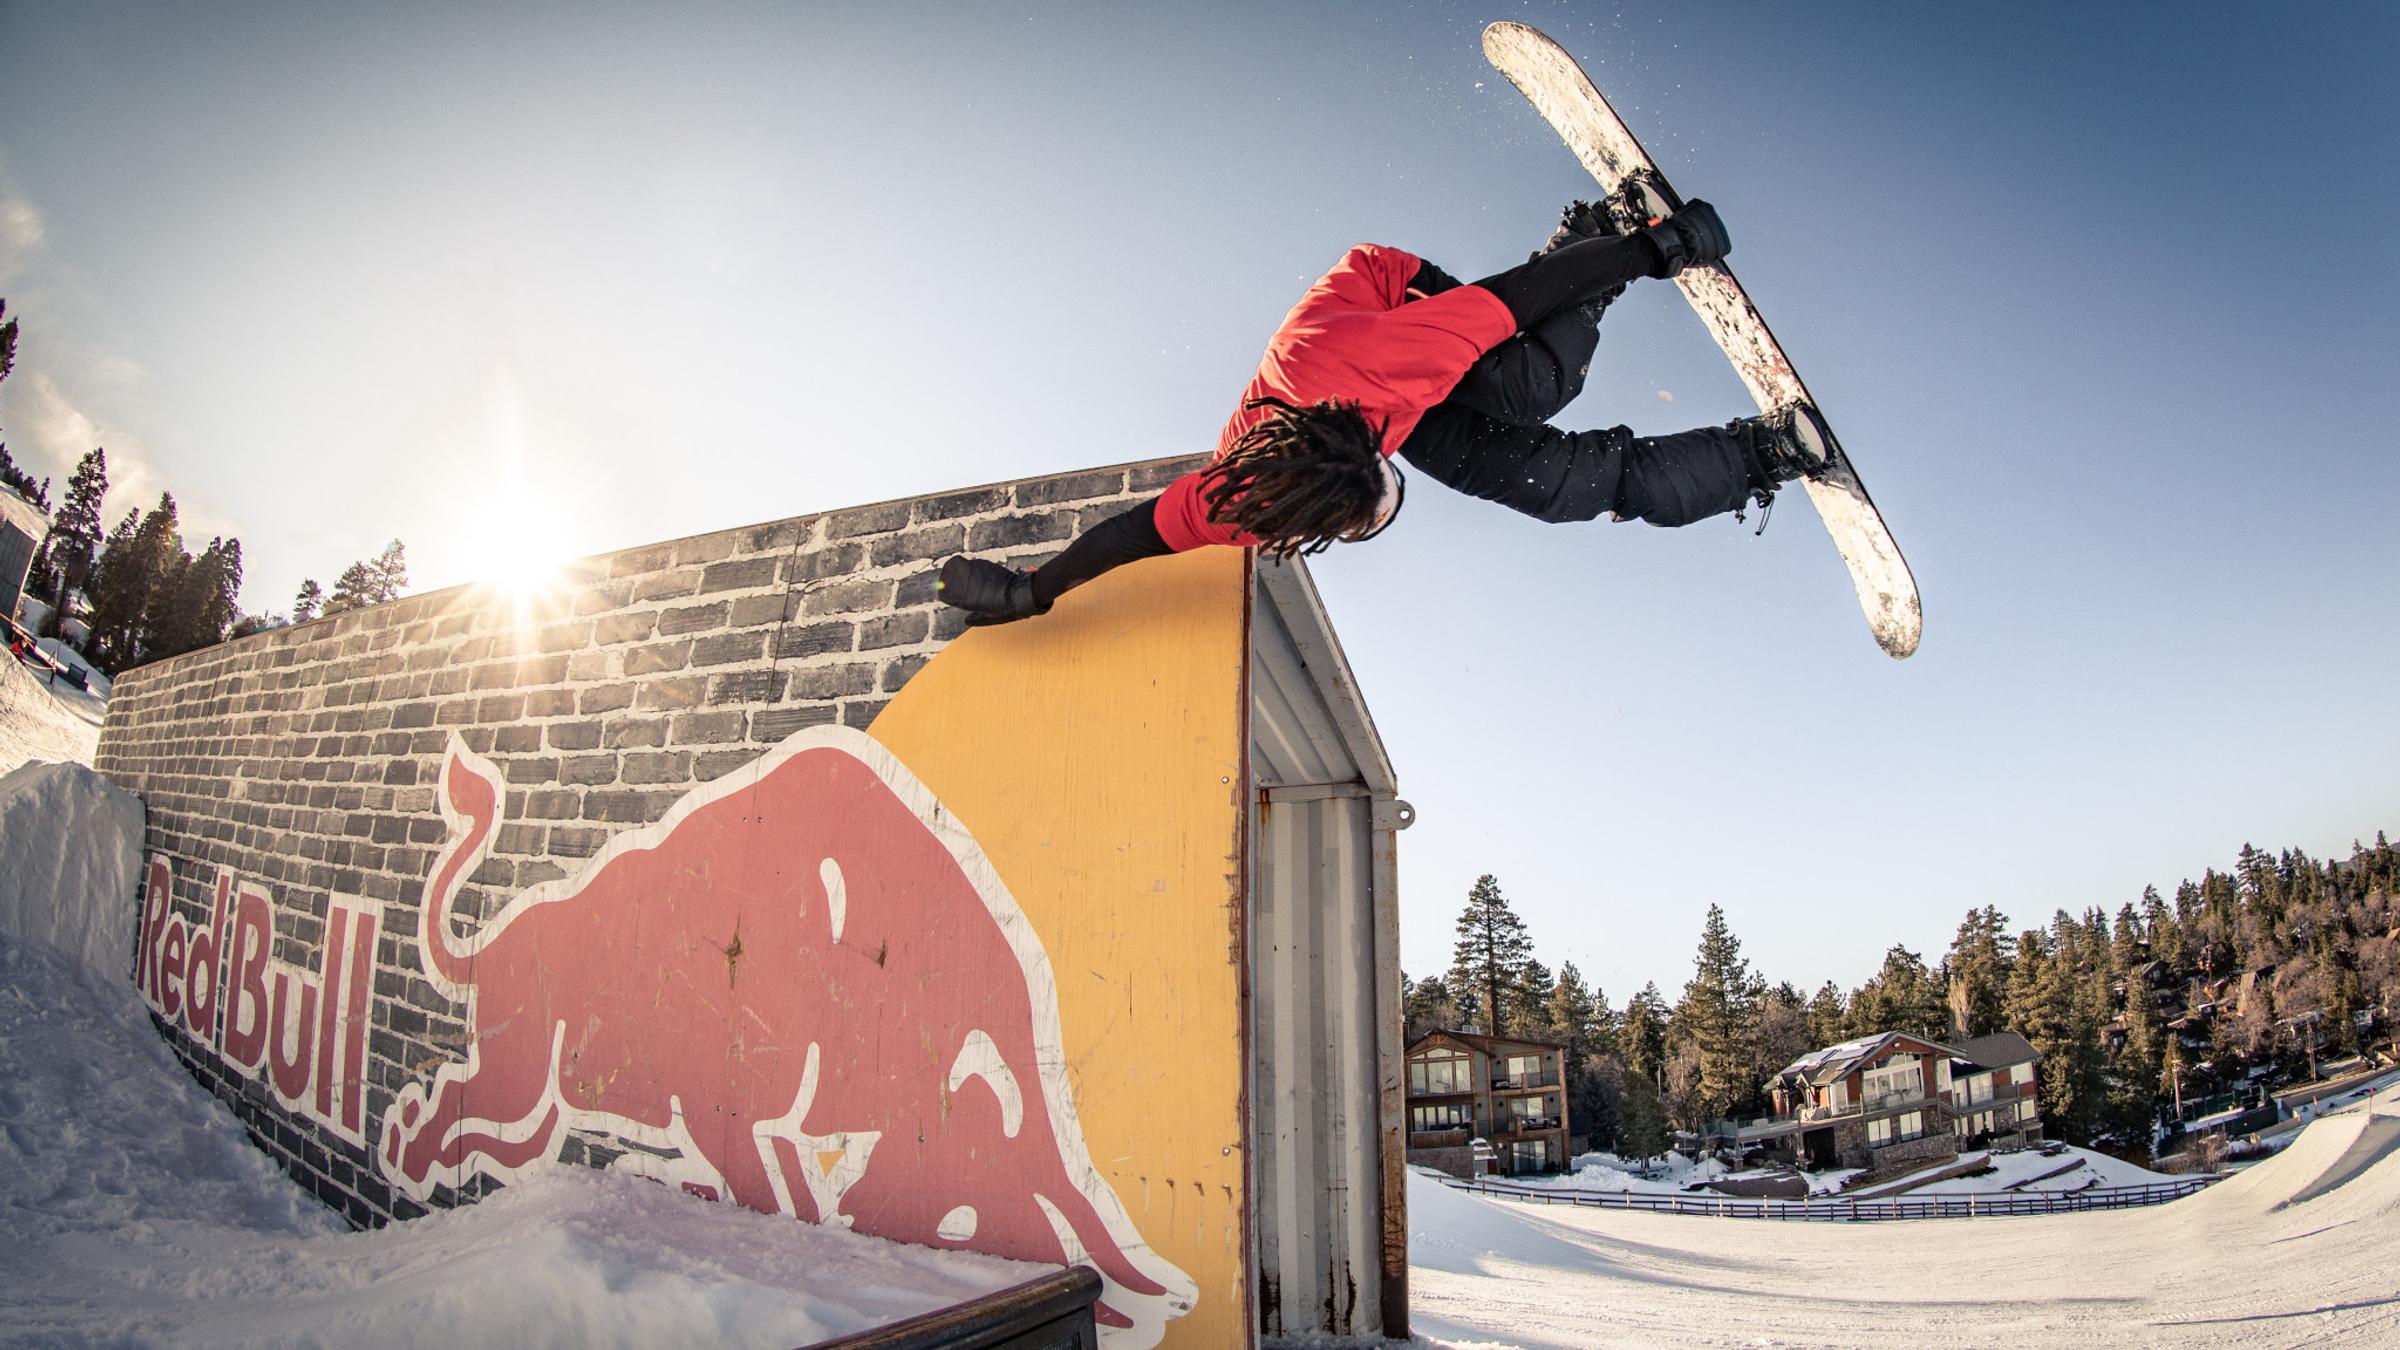 Snowboarder doing a trick on a container